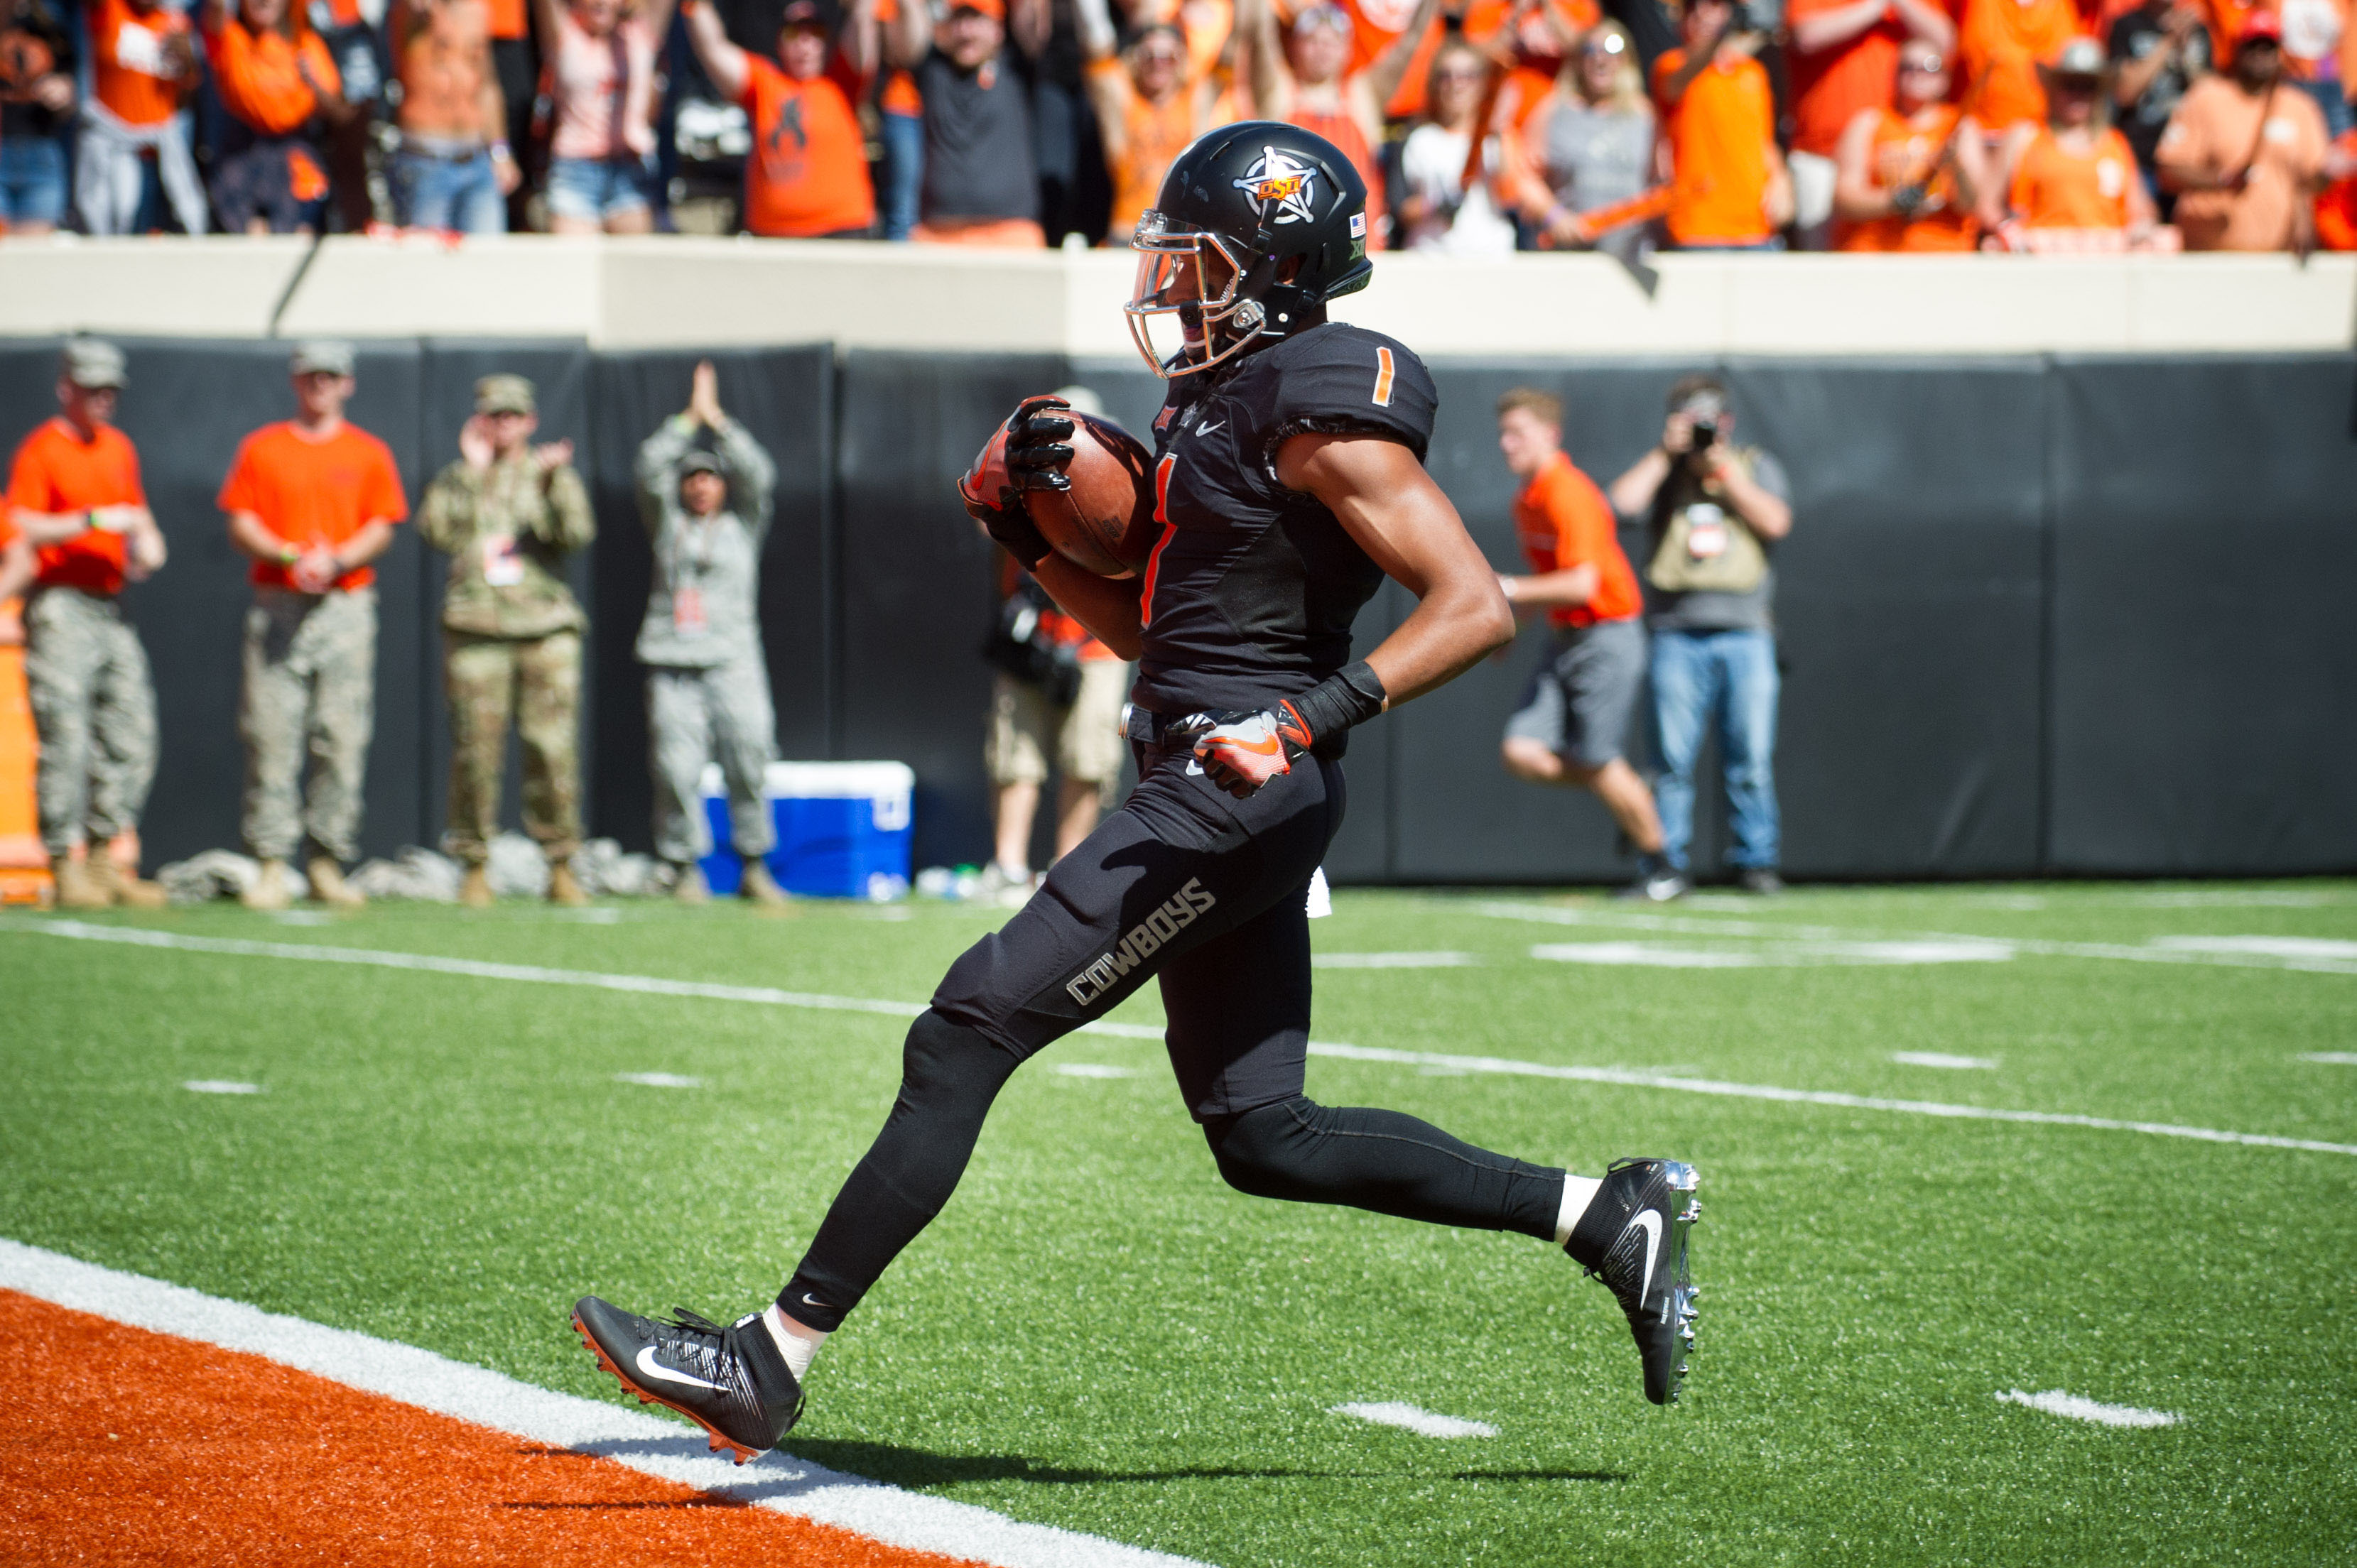 Oklahoma State Football: Ranking the 10 best players on the roster